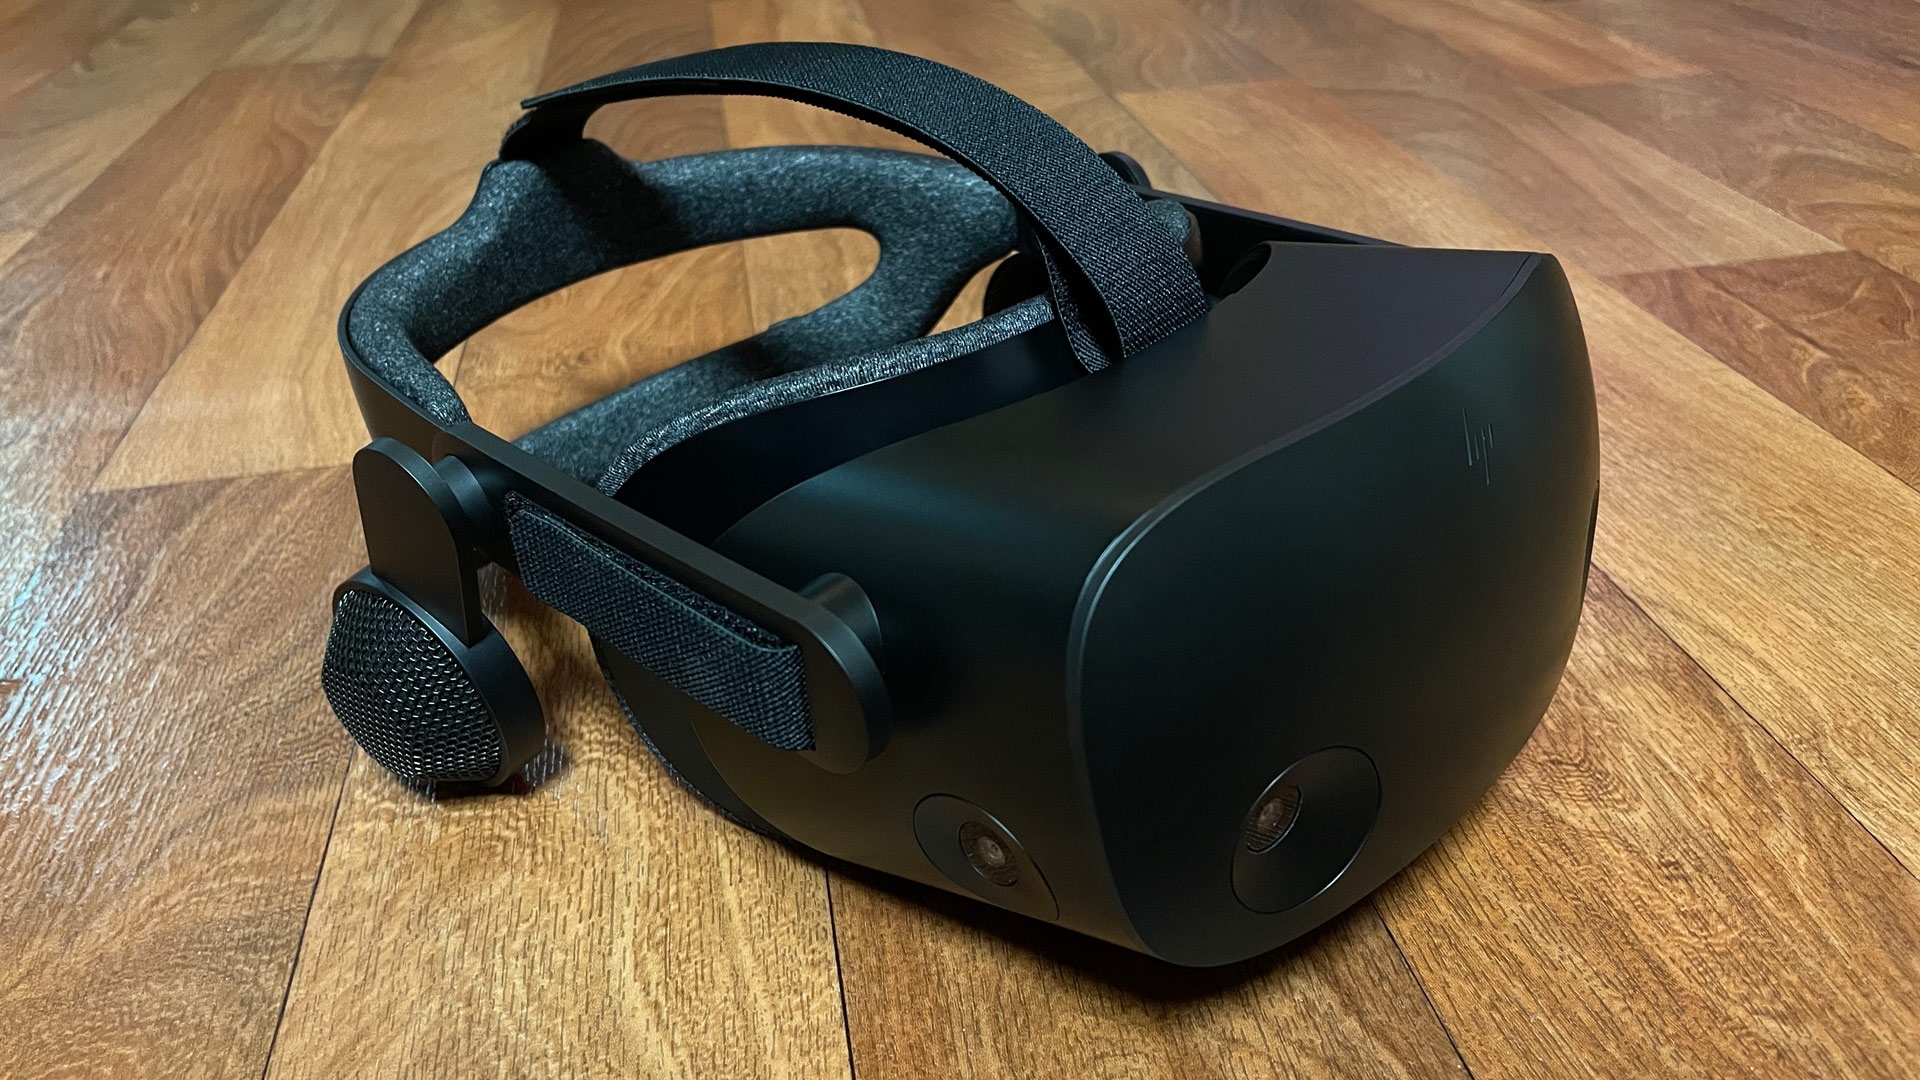 2021 Newest HP Reverb G2 Virtual Reality Headset